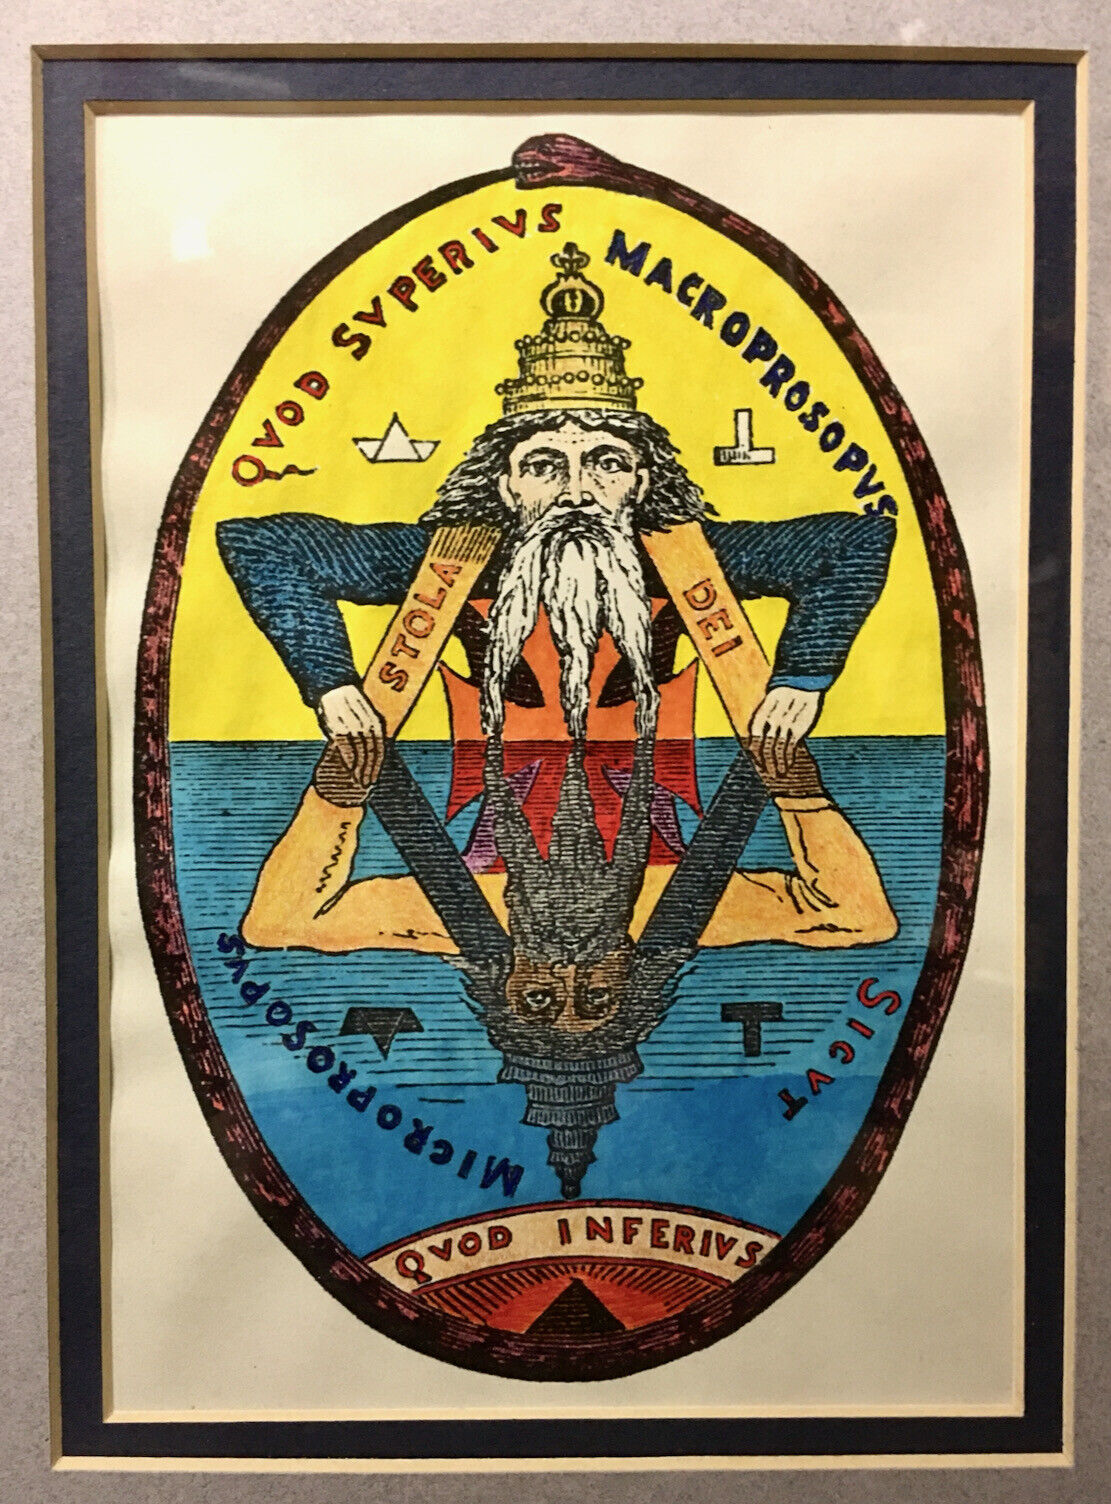 FRAMED HAND-COLORED OCCULT PRINT MACROPOSOPUS AS ABOVE SO BELOW EMERALD TABLET